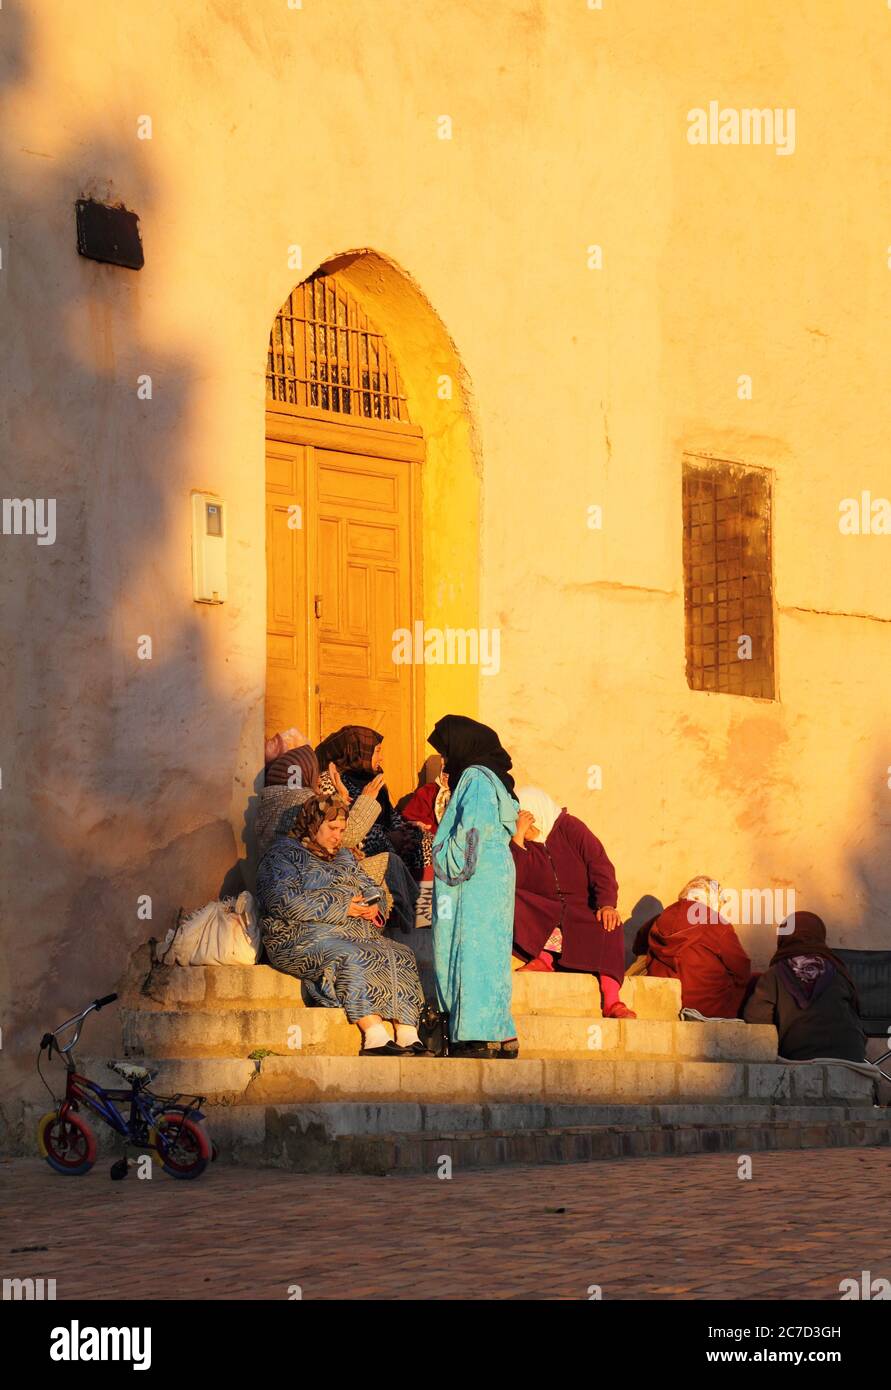 A group of typically dressed Moroccan women sitting on steps in the late afternoon winter sunshine. December 22, 2013 in Meknes, Morocco. UNESCO site. Stock Photo